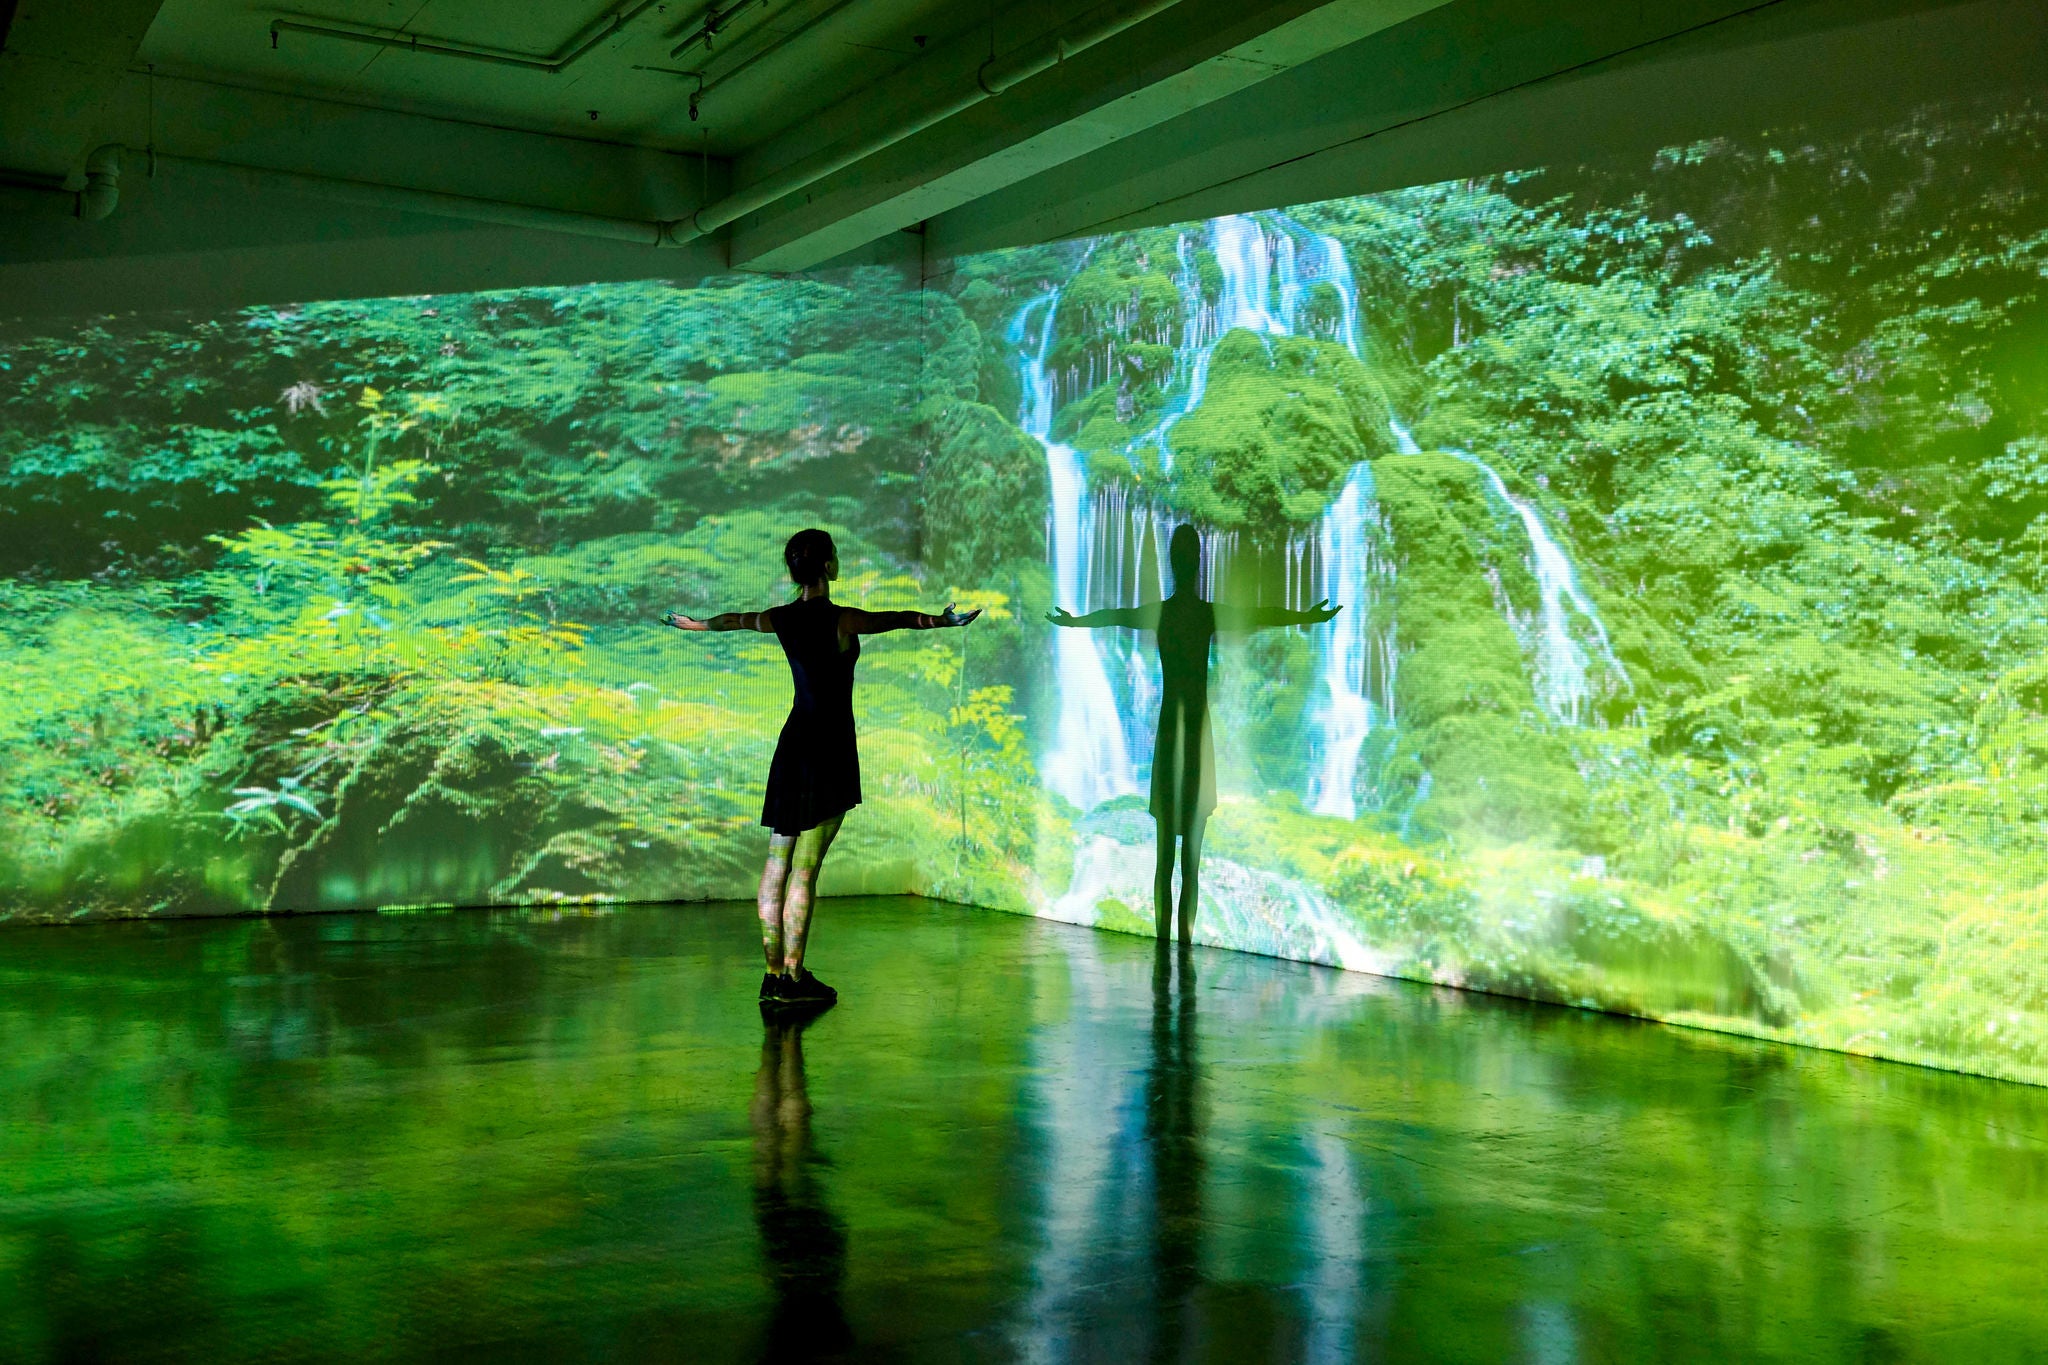 Girl looking at a nature landscape being projected onto the wall in a gallery space